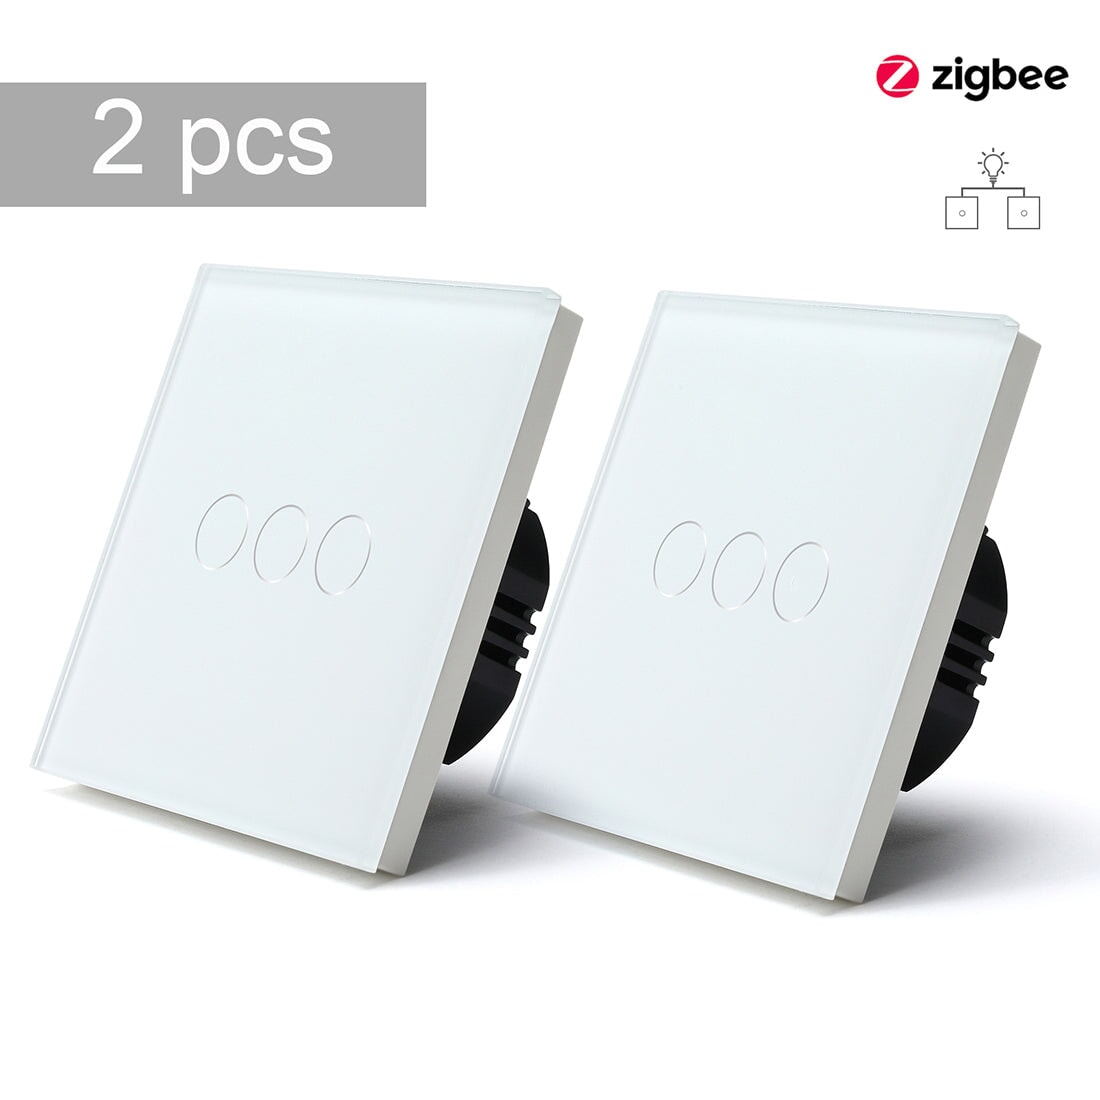 BSEED Zigbee Single Live Line Switch 1/2/3 Gang 1/2/3 Way Wall Smart Light Switch Single Live Line 1/2/3 pack Light Switches Bseedswitch White 3Gang 2 Pcs/Pack